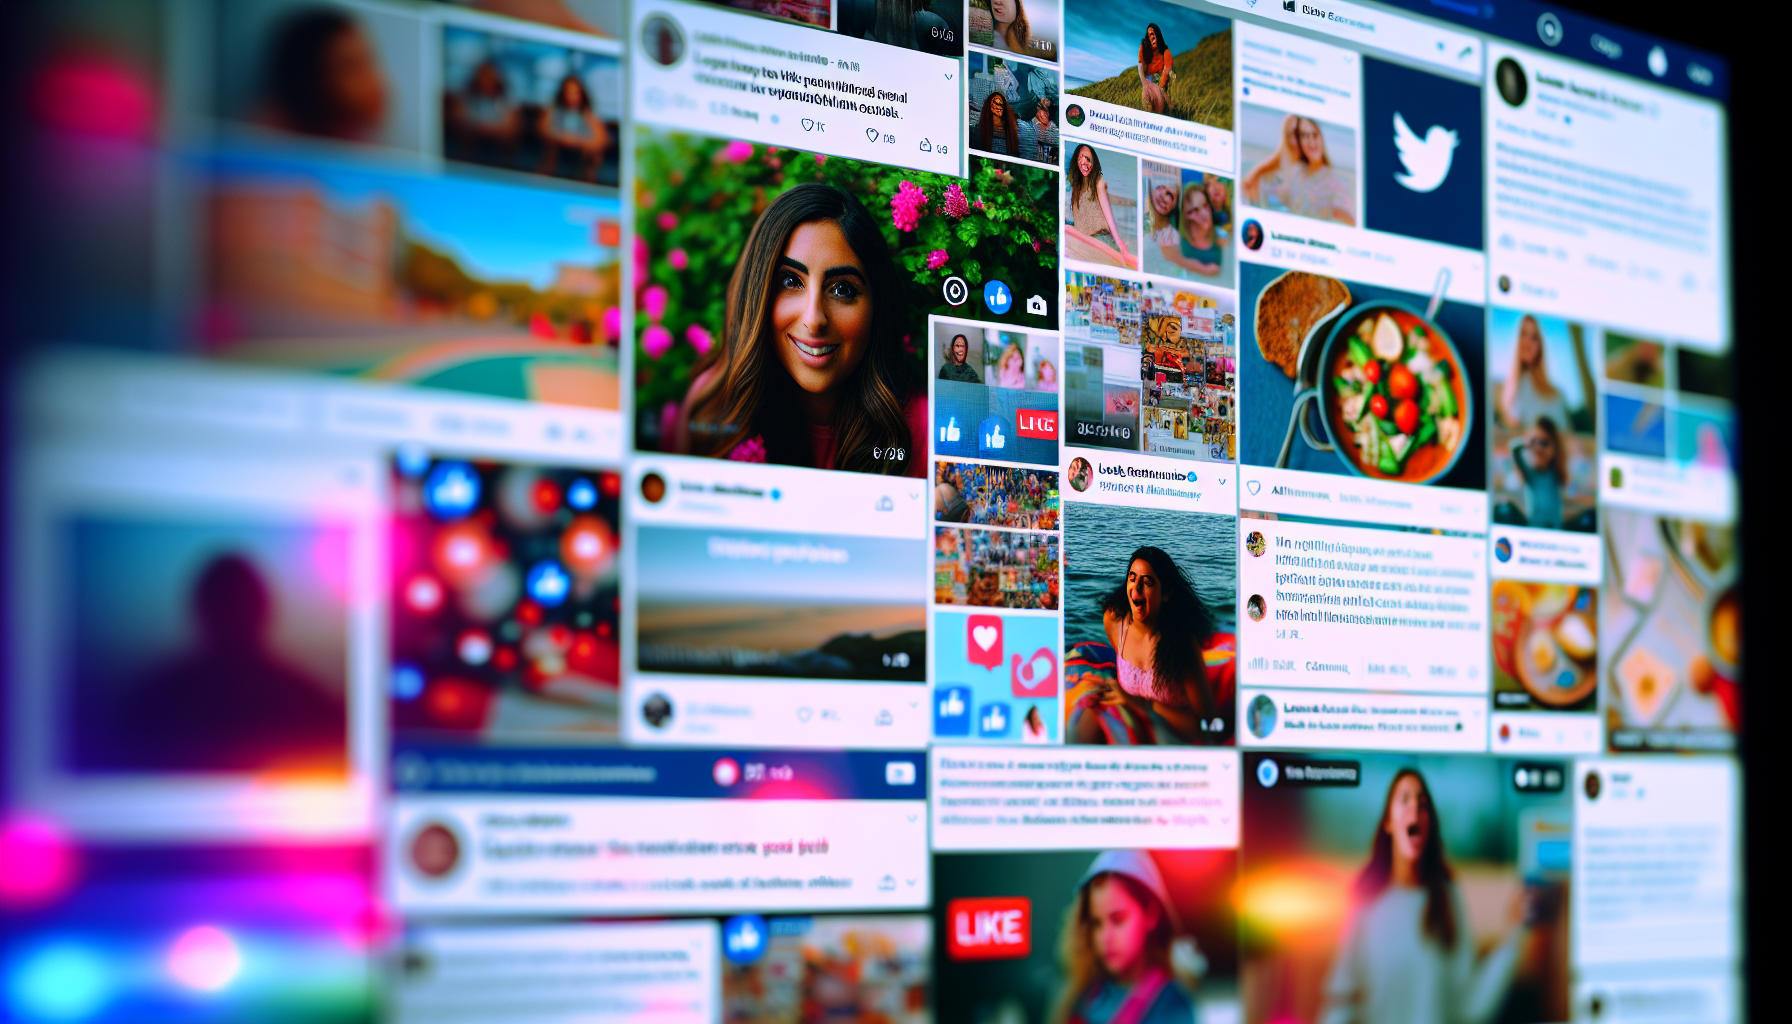 User-generated content on social media platforms